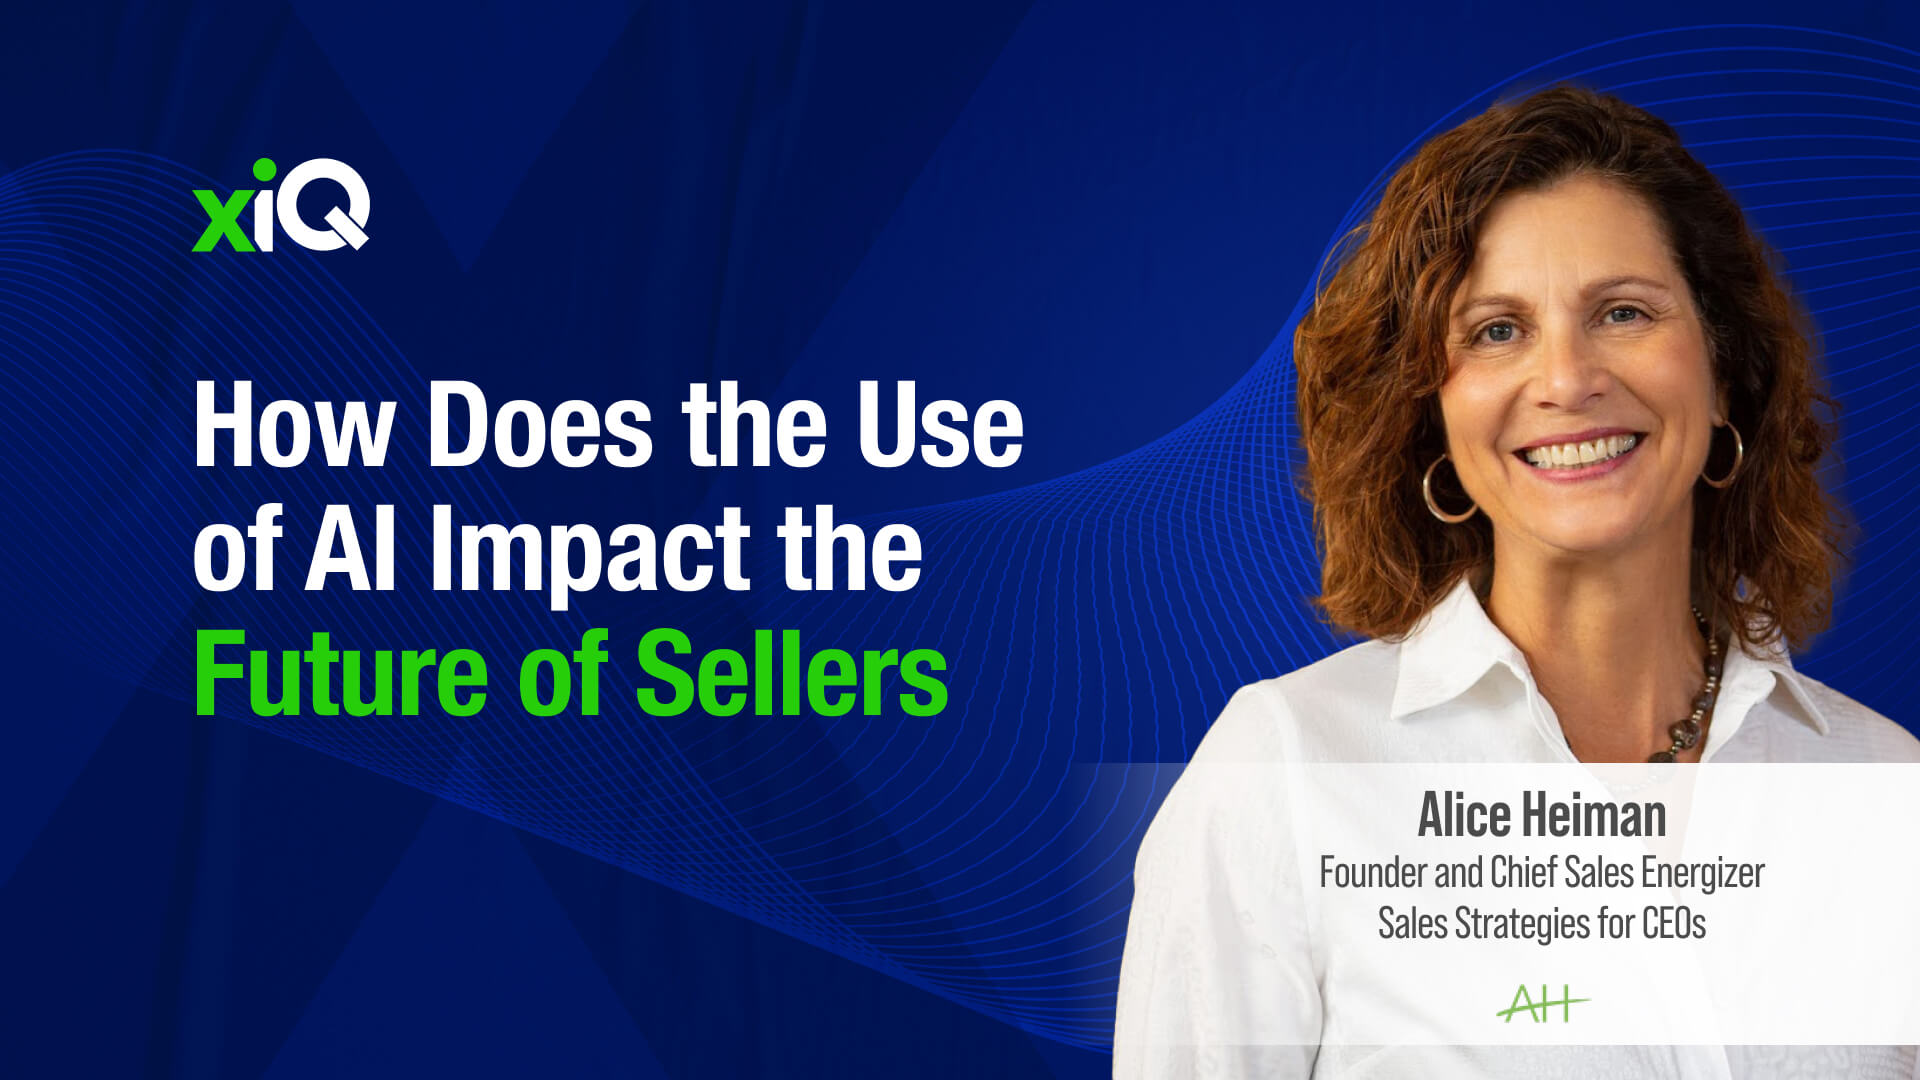 How Does the Use of AI Impact the Future of Sellers